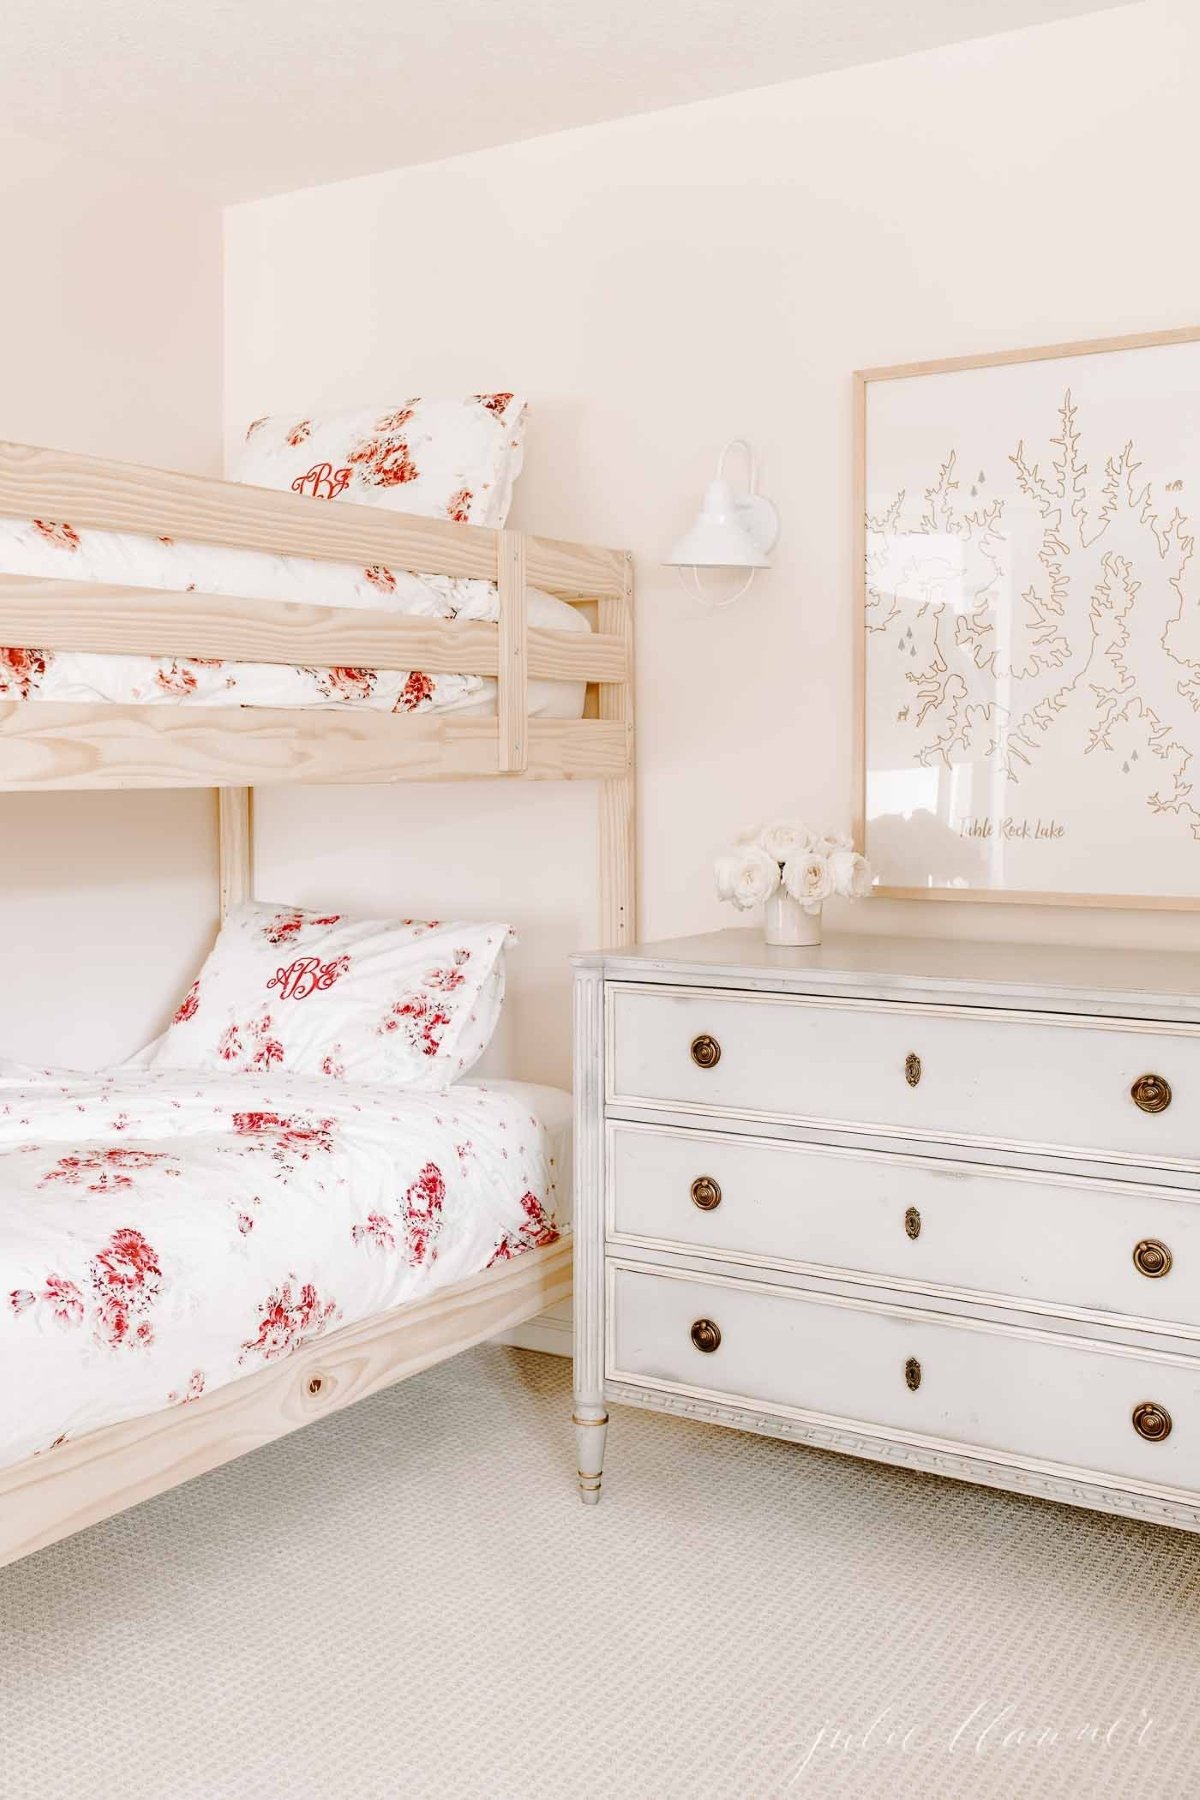 Girls bunk beds with floral bedding in a pink bedroom.